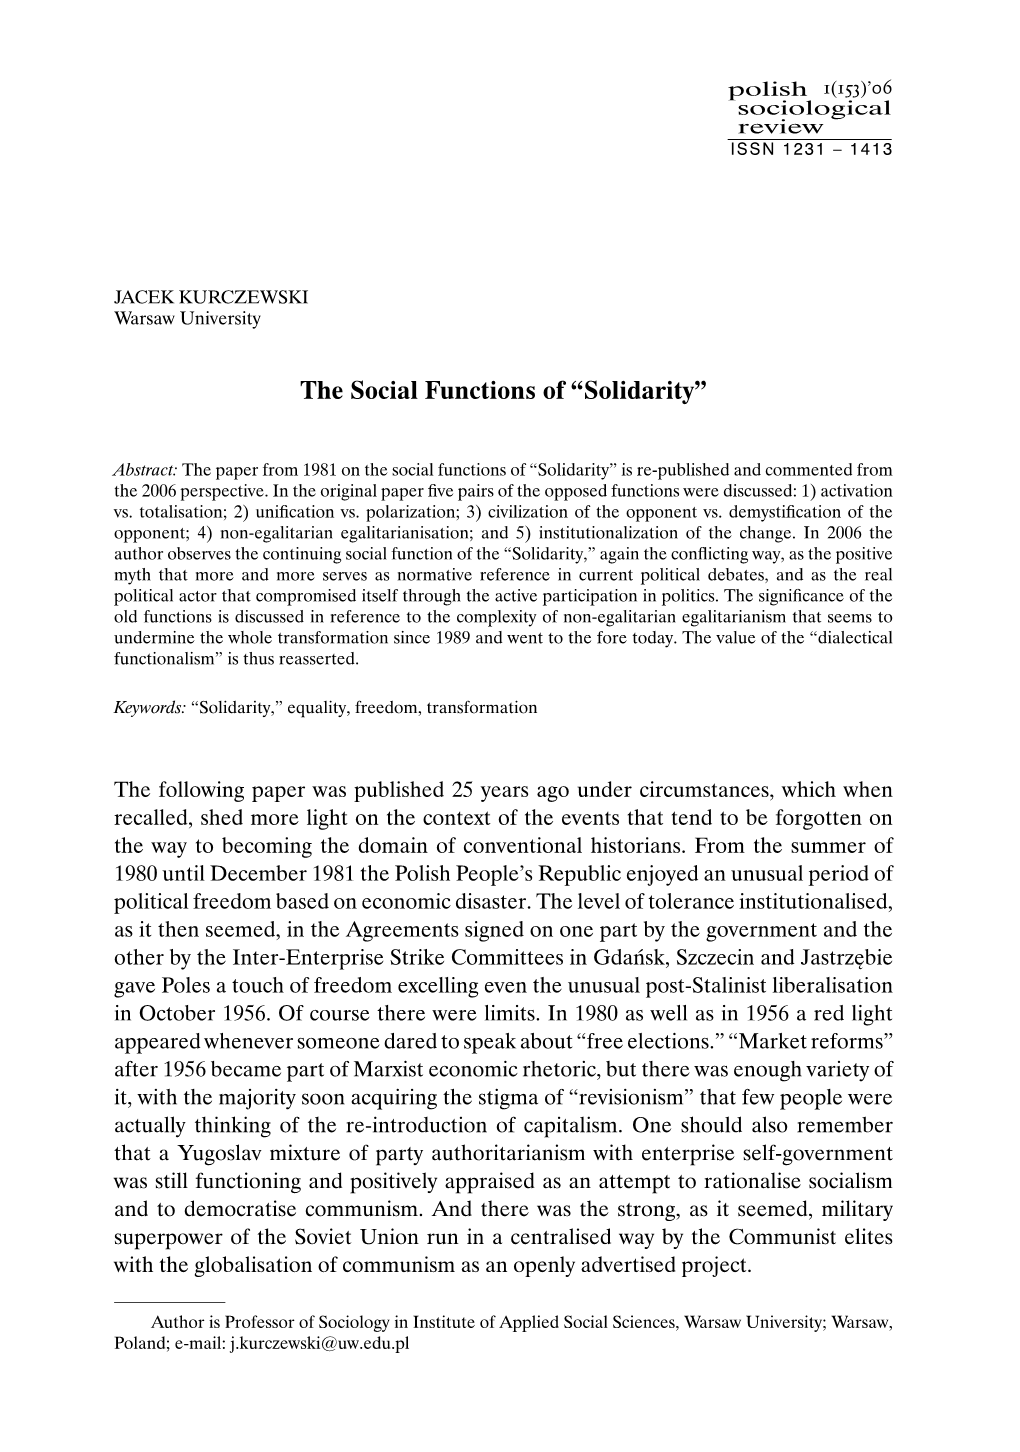 The Social Functions of “Solidarity”